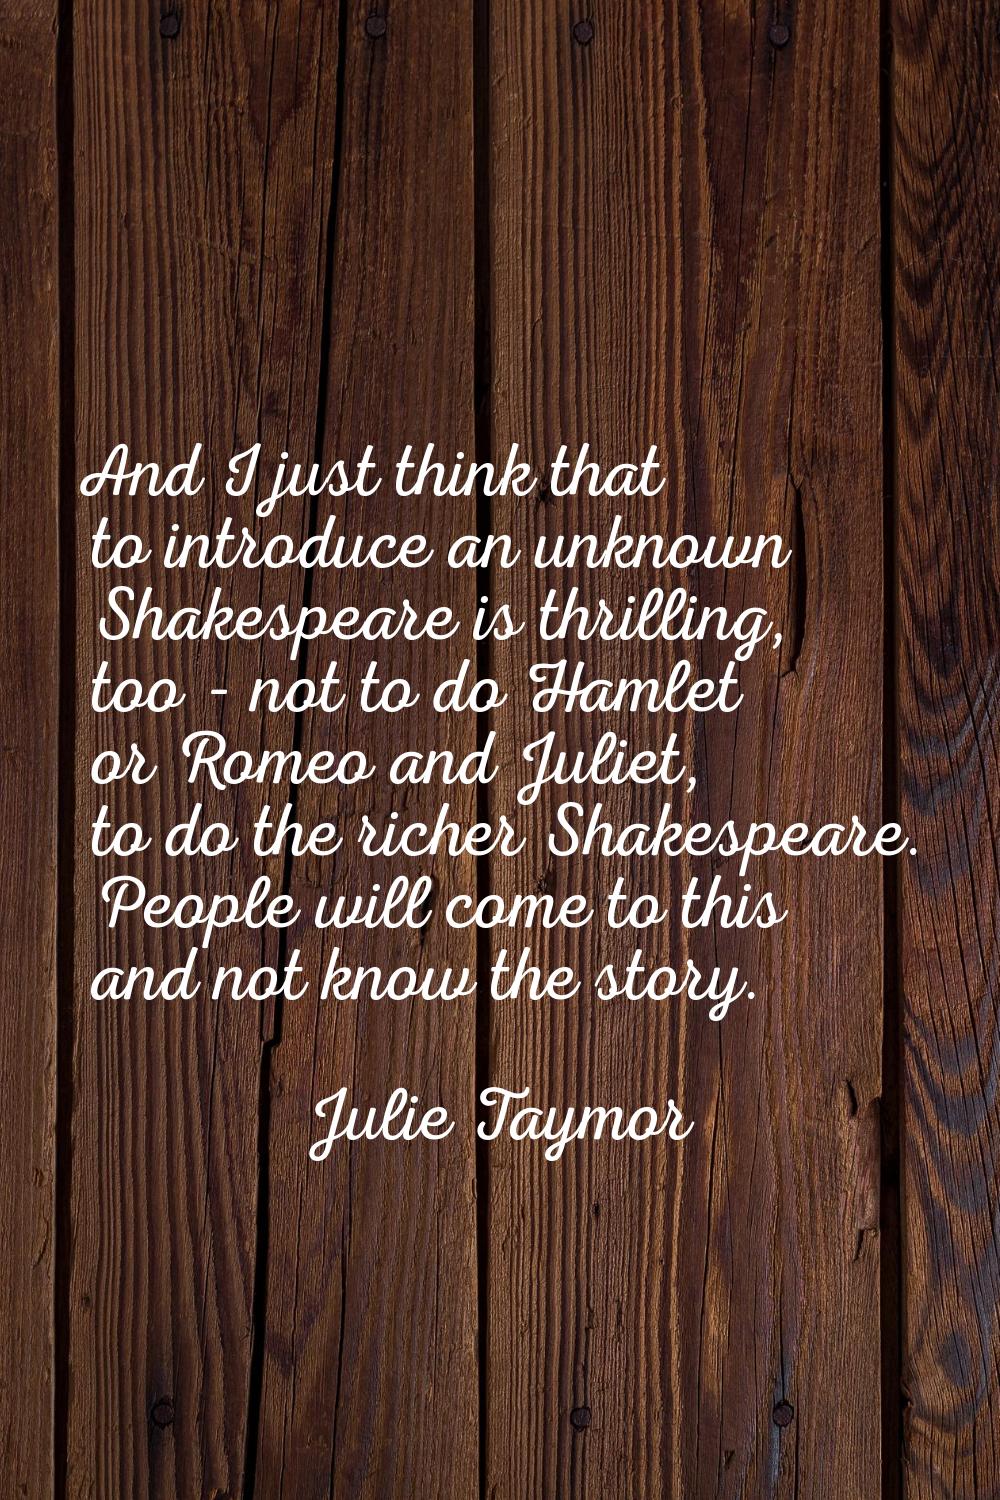 And I just think that to introduce an unknown Shakespeare is thrilling, too - not to do Hamlet or R